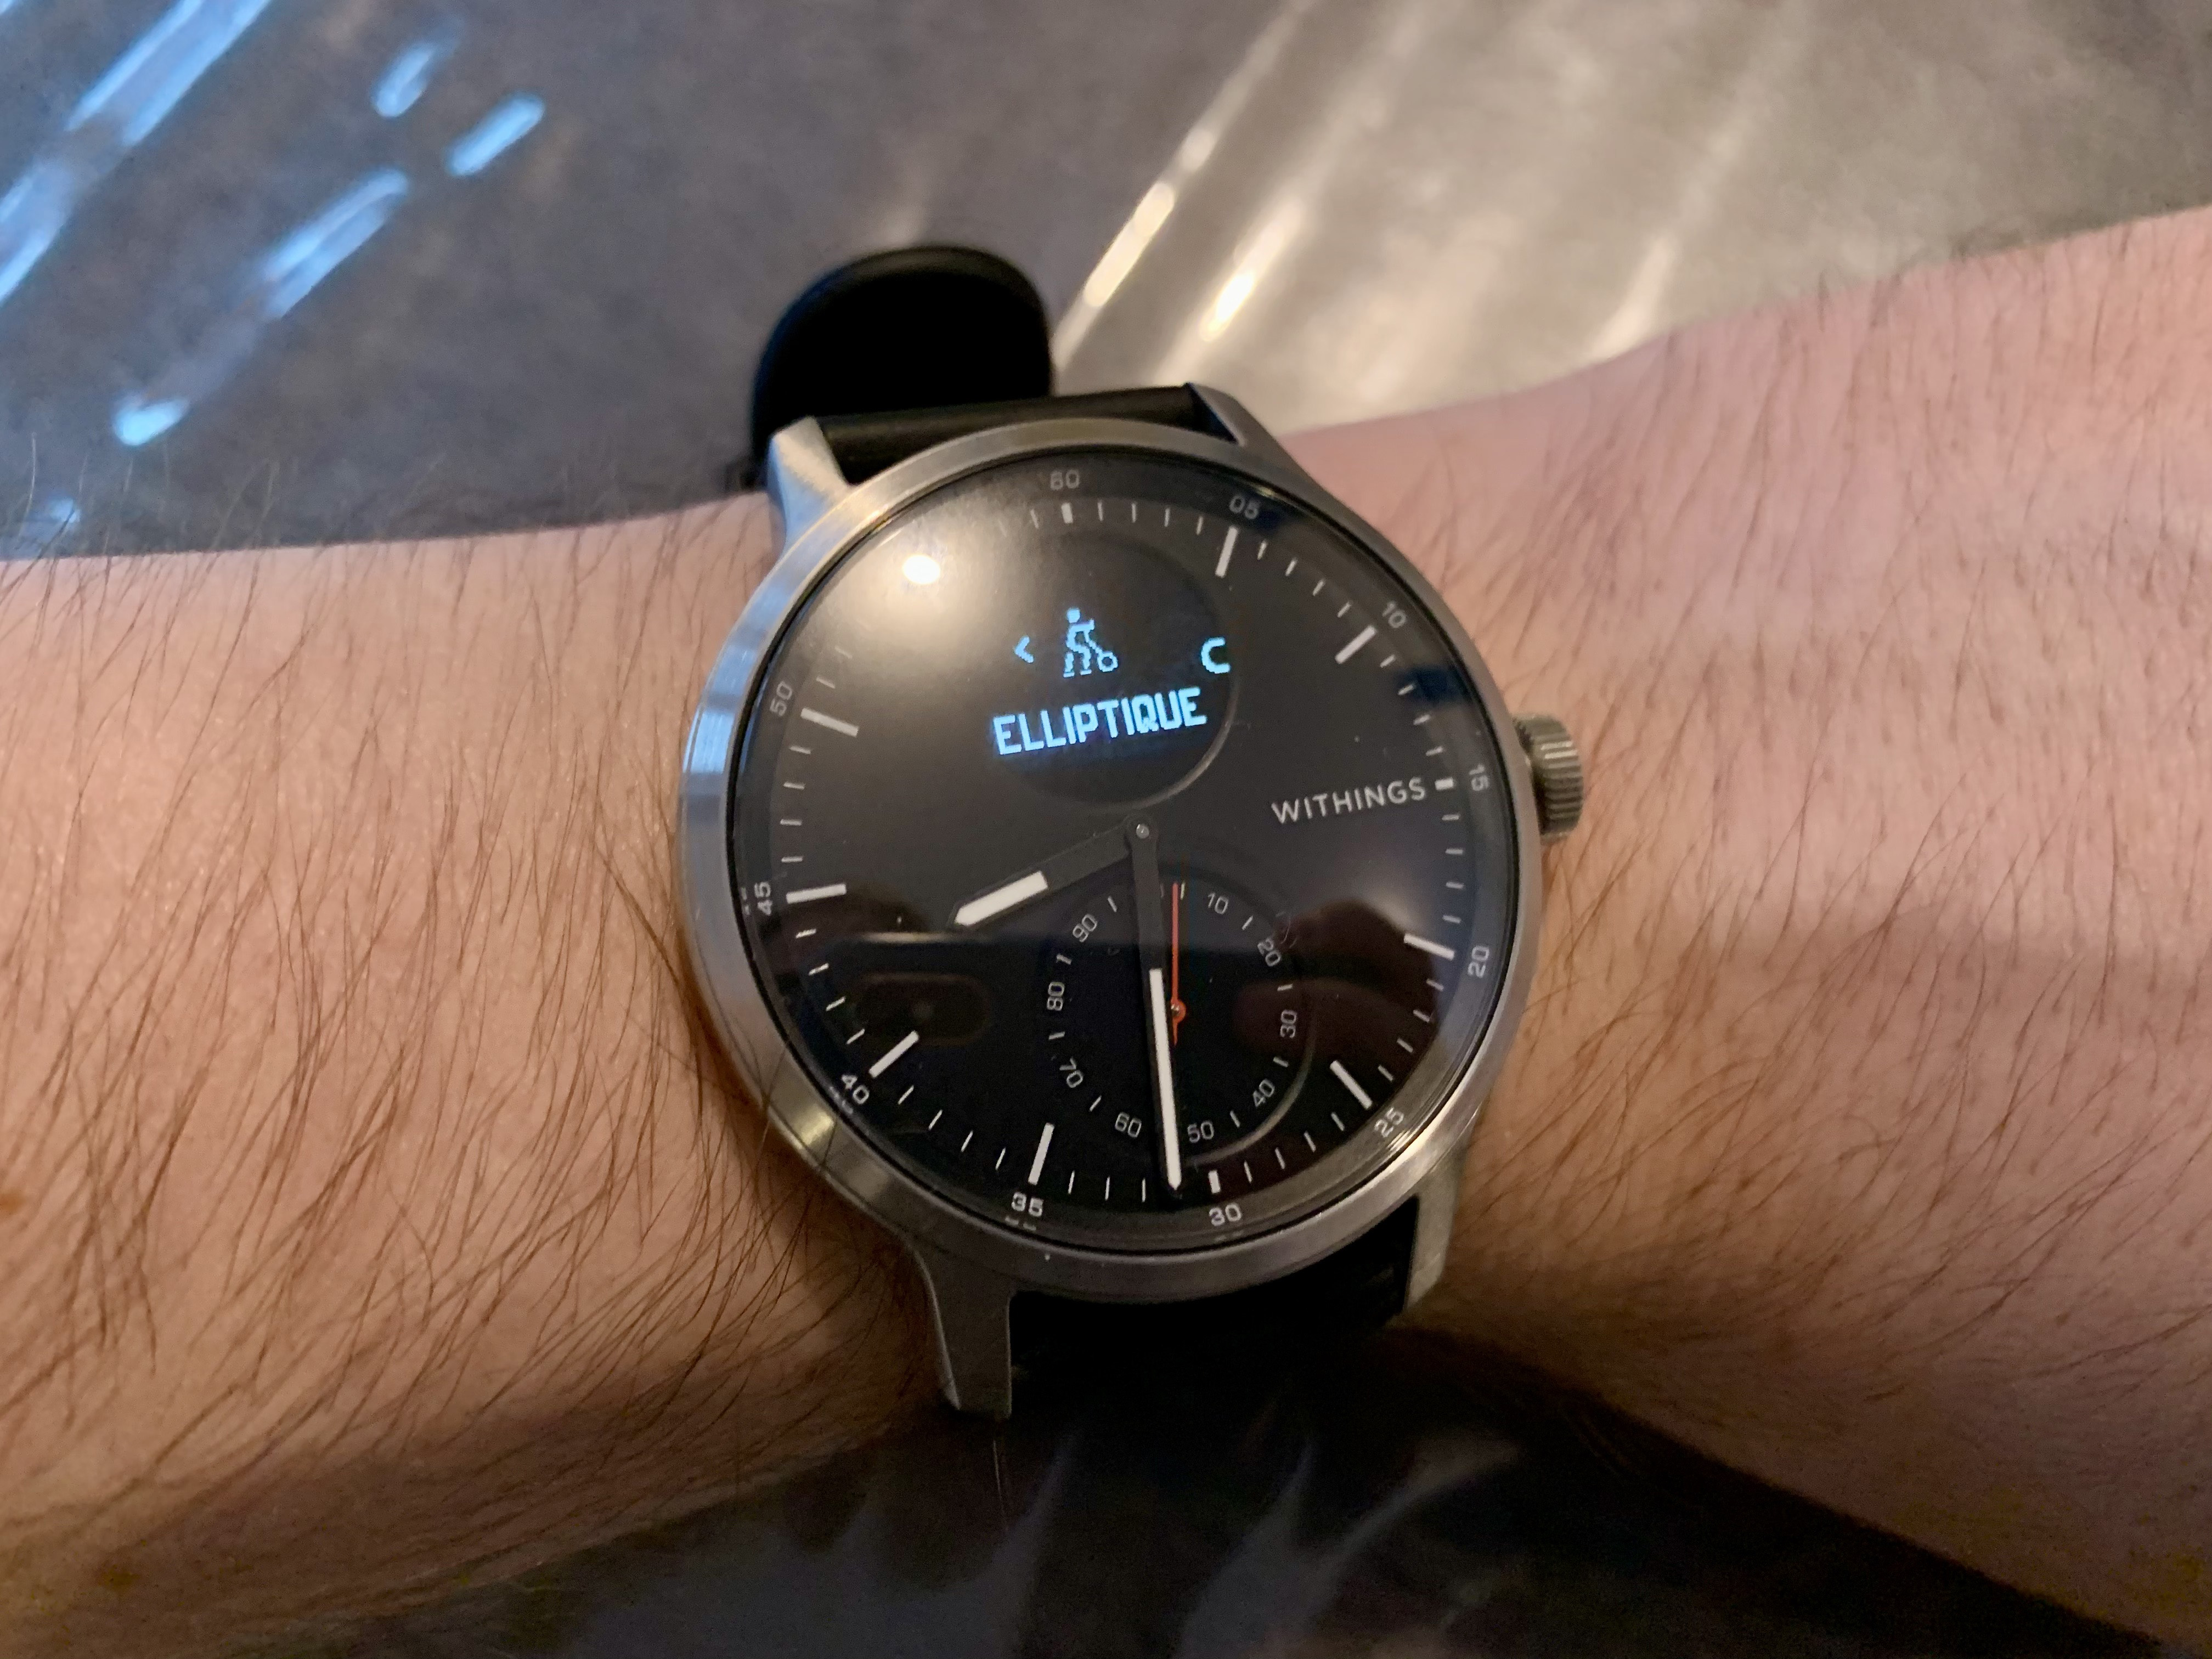 Withings Scanwatch - Montre Connectée Hybride av…